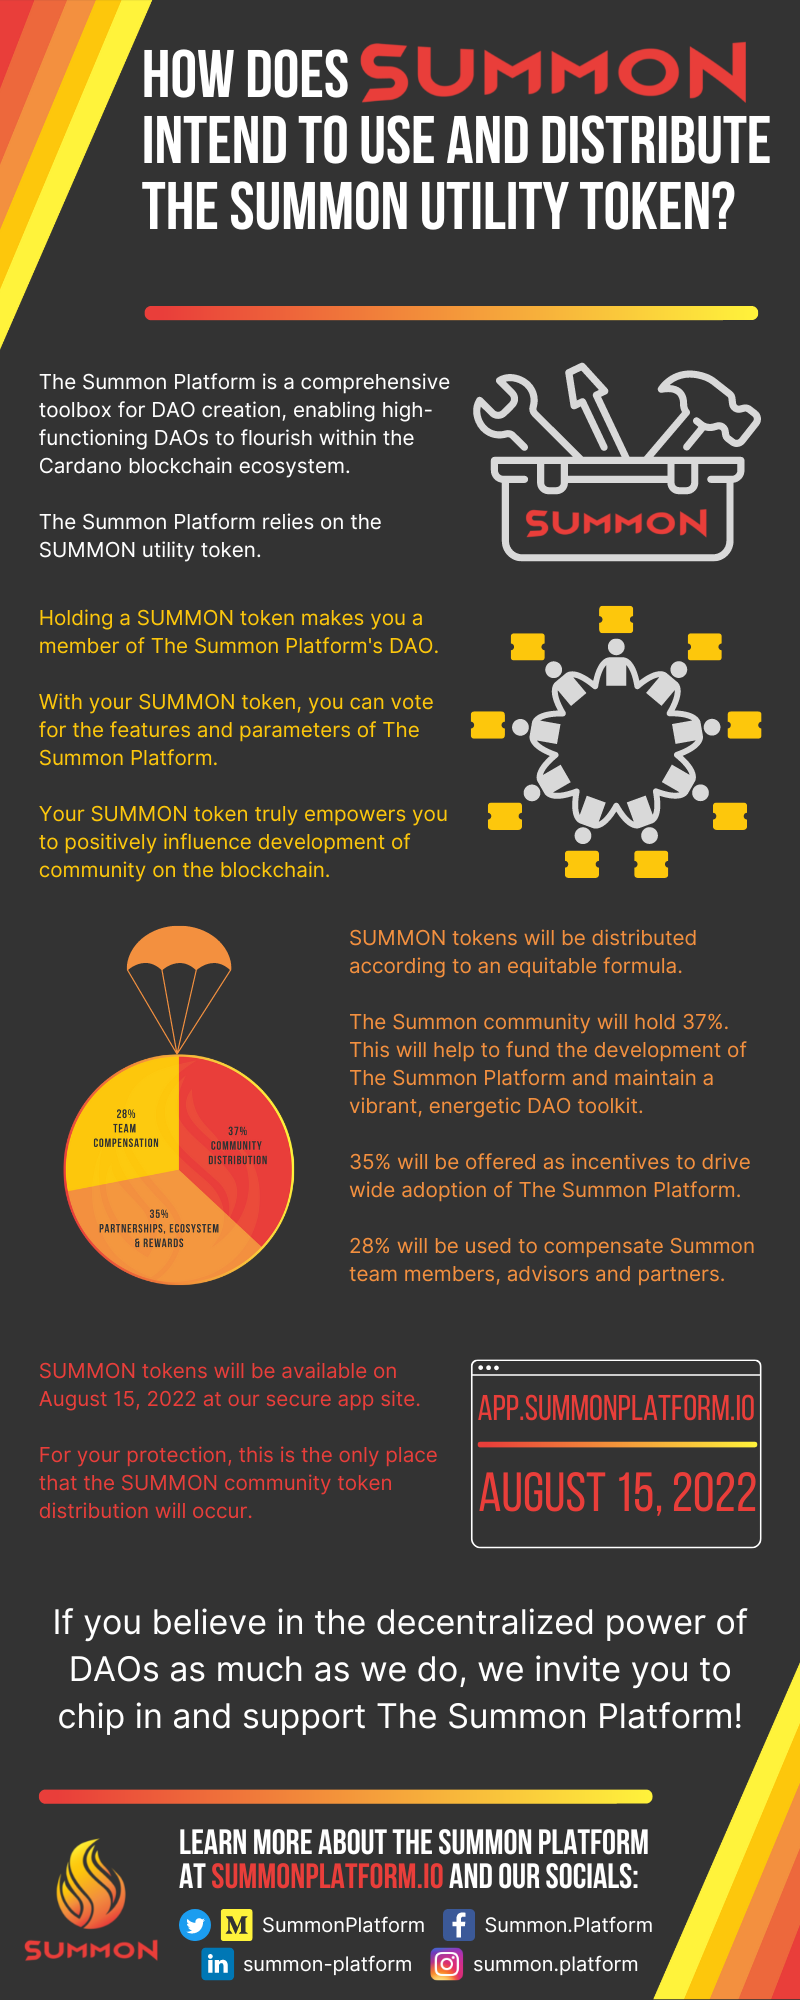 Infographic from The Summon Platform - "How does Summon intend to use and distribute the SUMMON utility token?"